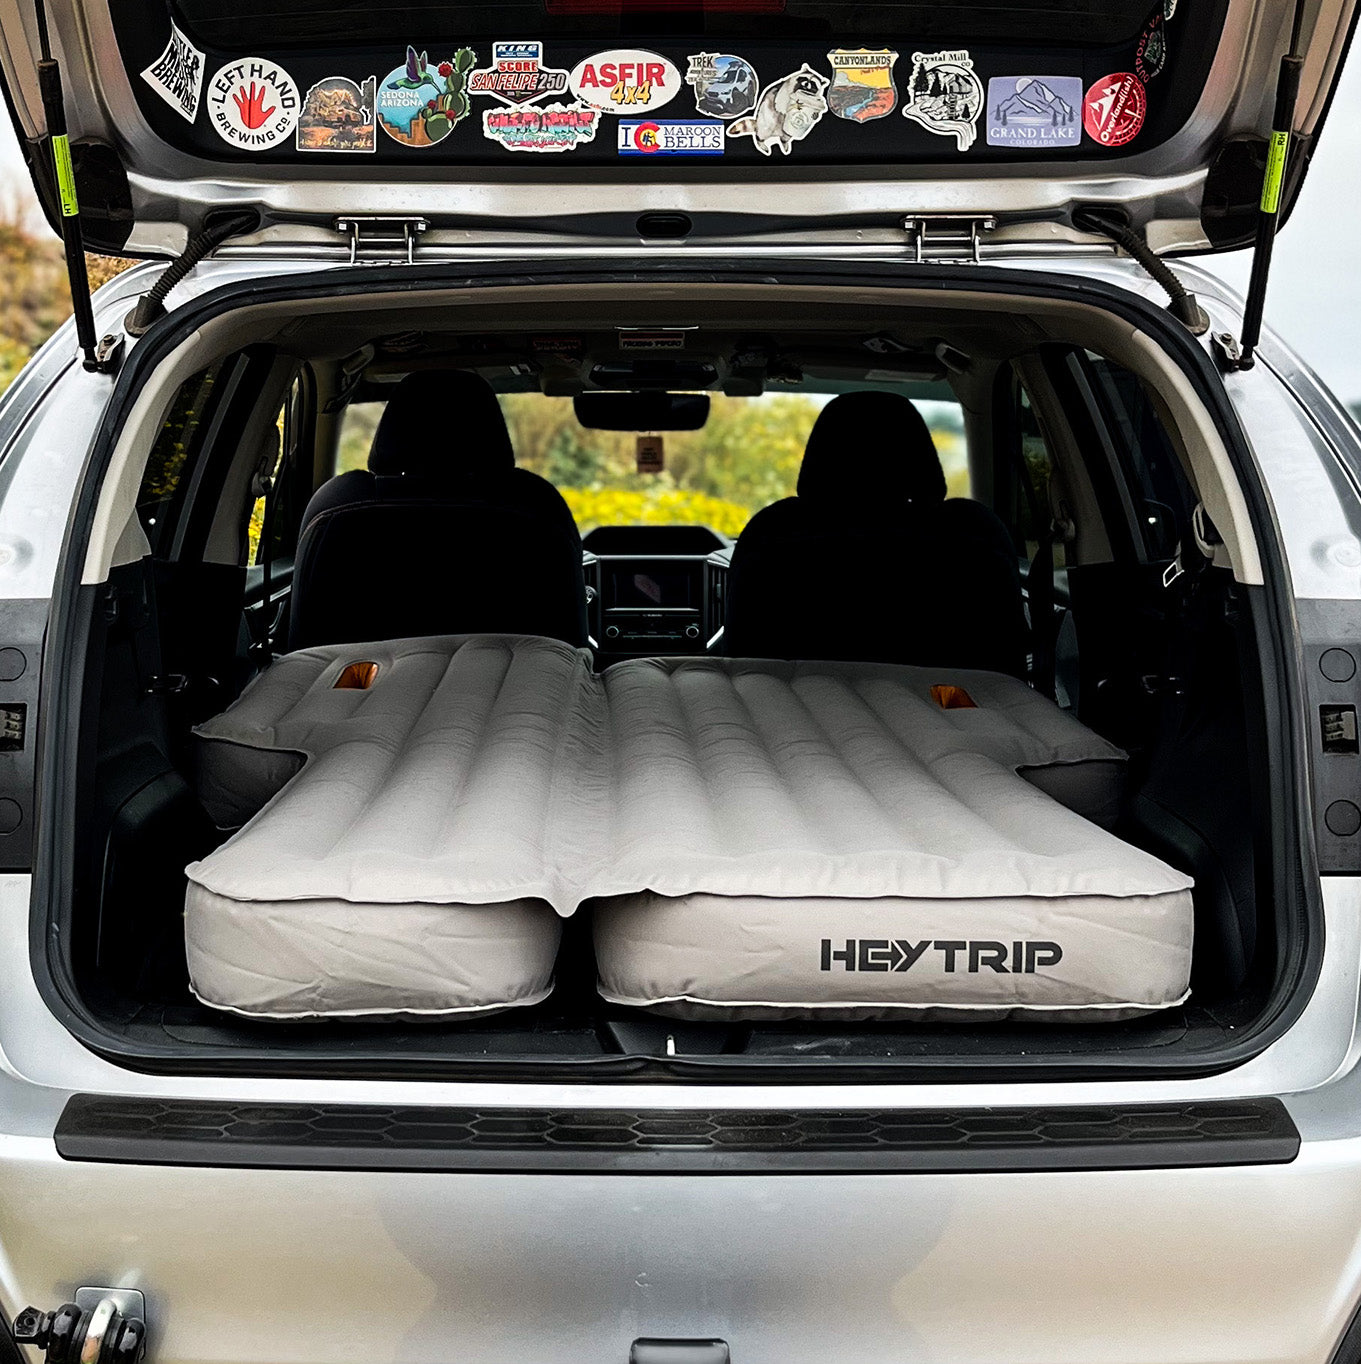 HEYTRIP® SUV Inflatable Air Mattress for Car Camping – HEYTRIP Official Site